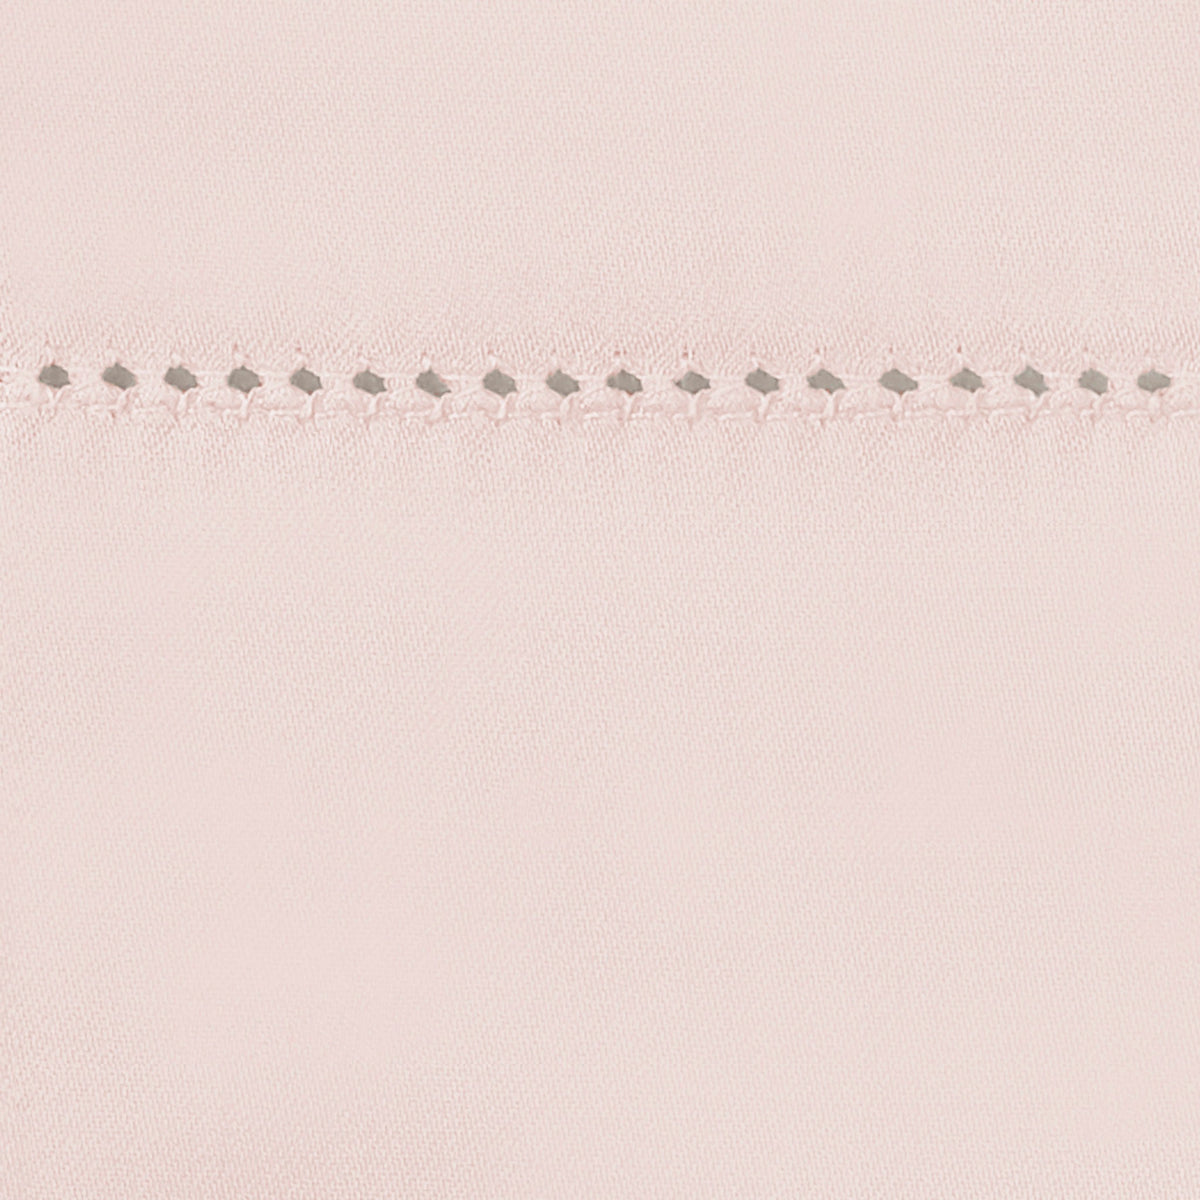 Swatch Sample of Matouk Milano Hemstitch Bedding in Color Blush